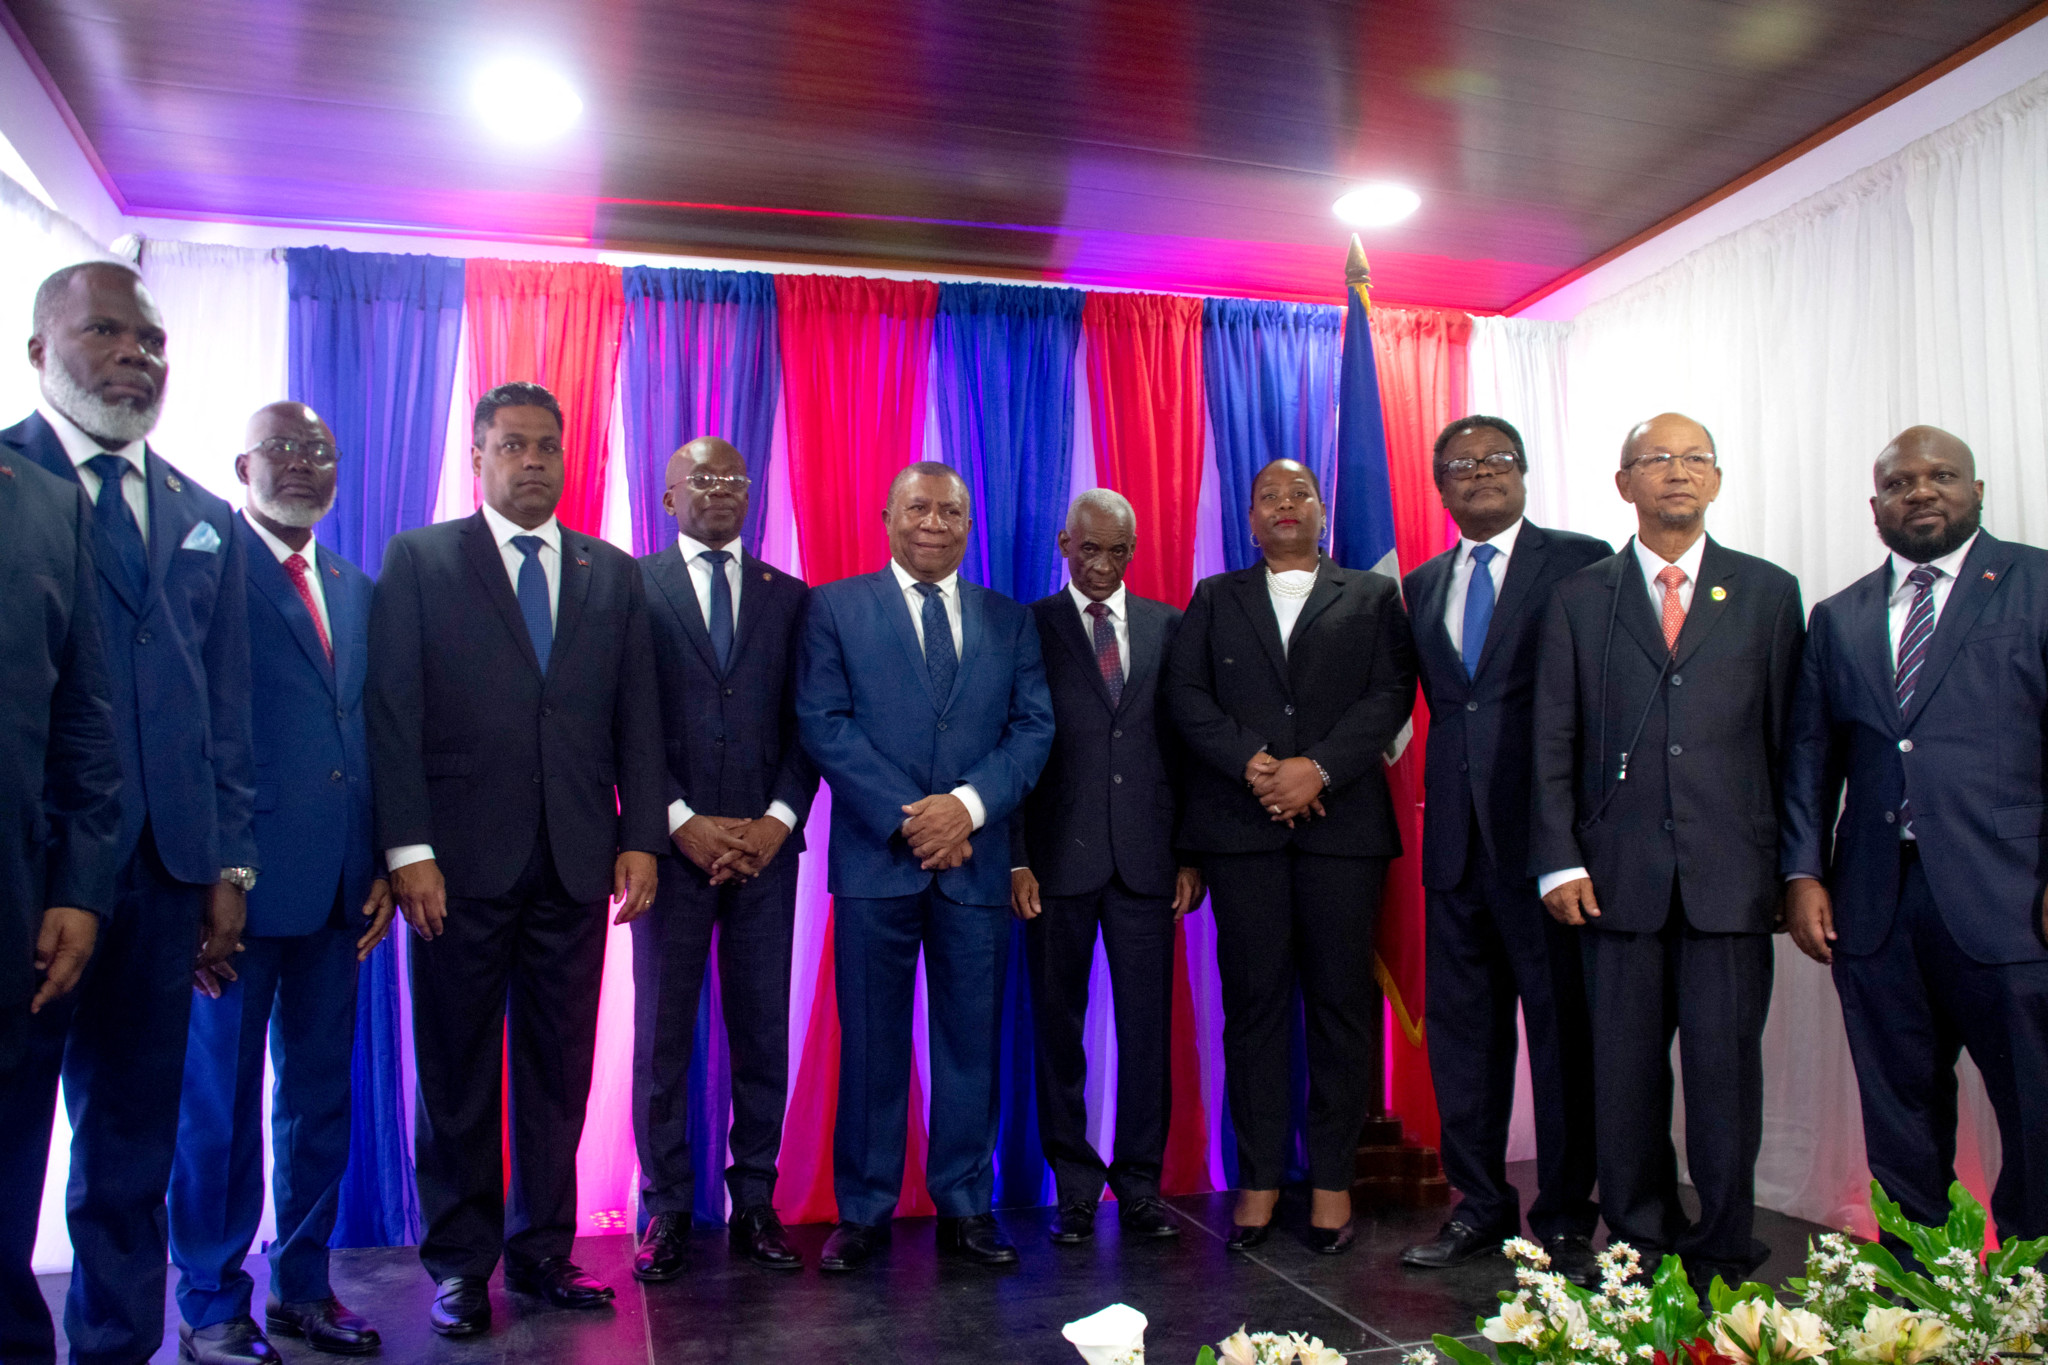 The members of the new Haitian transitional council pose after being sworn in at the National Palace in Port-au-Price, Haiti, on April 25, 2024. A long-awaited transitional ruling council was sworn in in crisis-torn Haiti Thursday, an official told AFP, the first step to forming a new government after months of gang violence in the Caribbean nation. (Photo by Clarens SIFFROY / AFP)